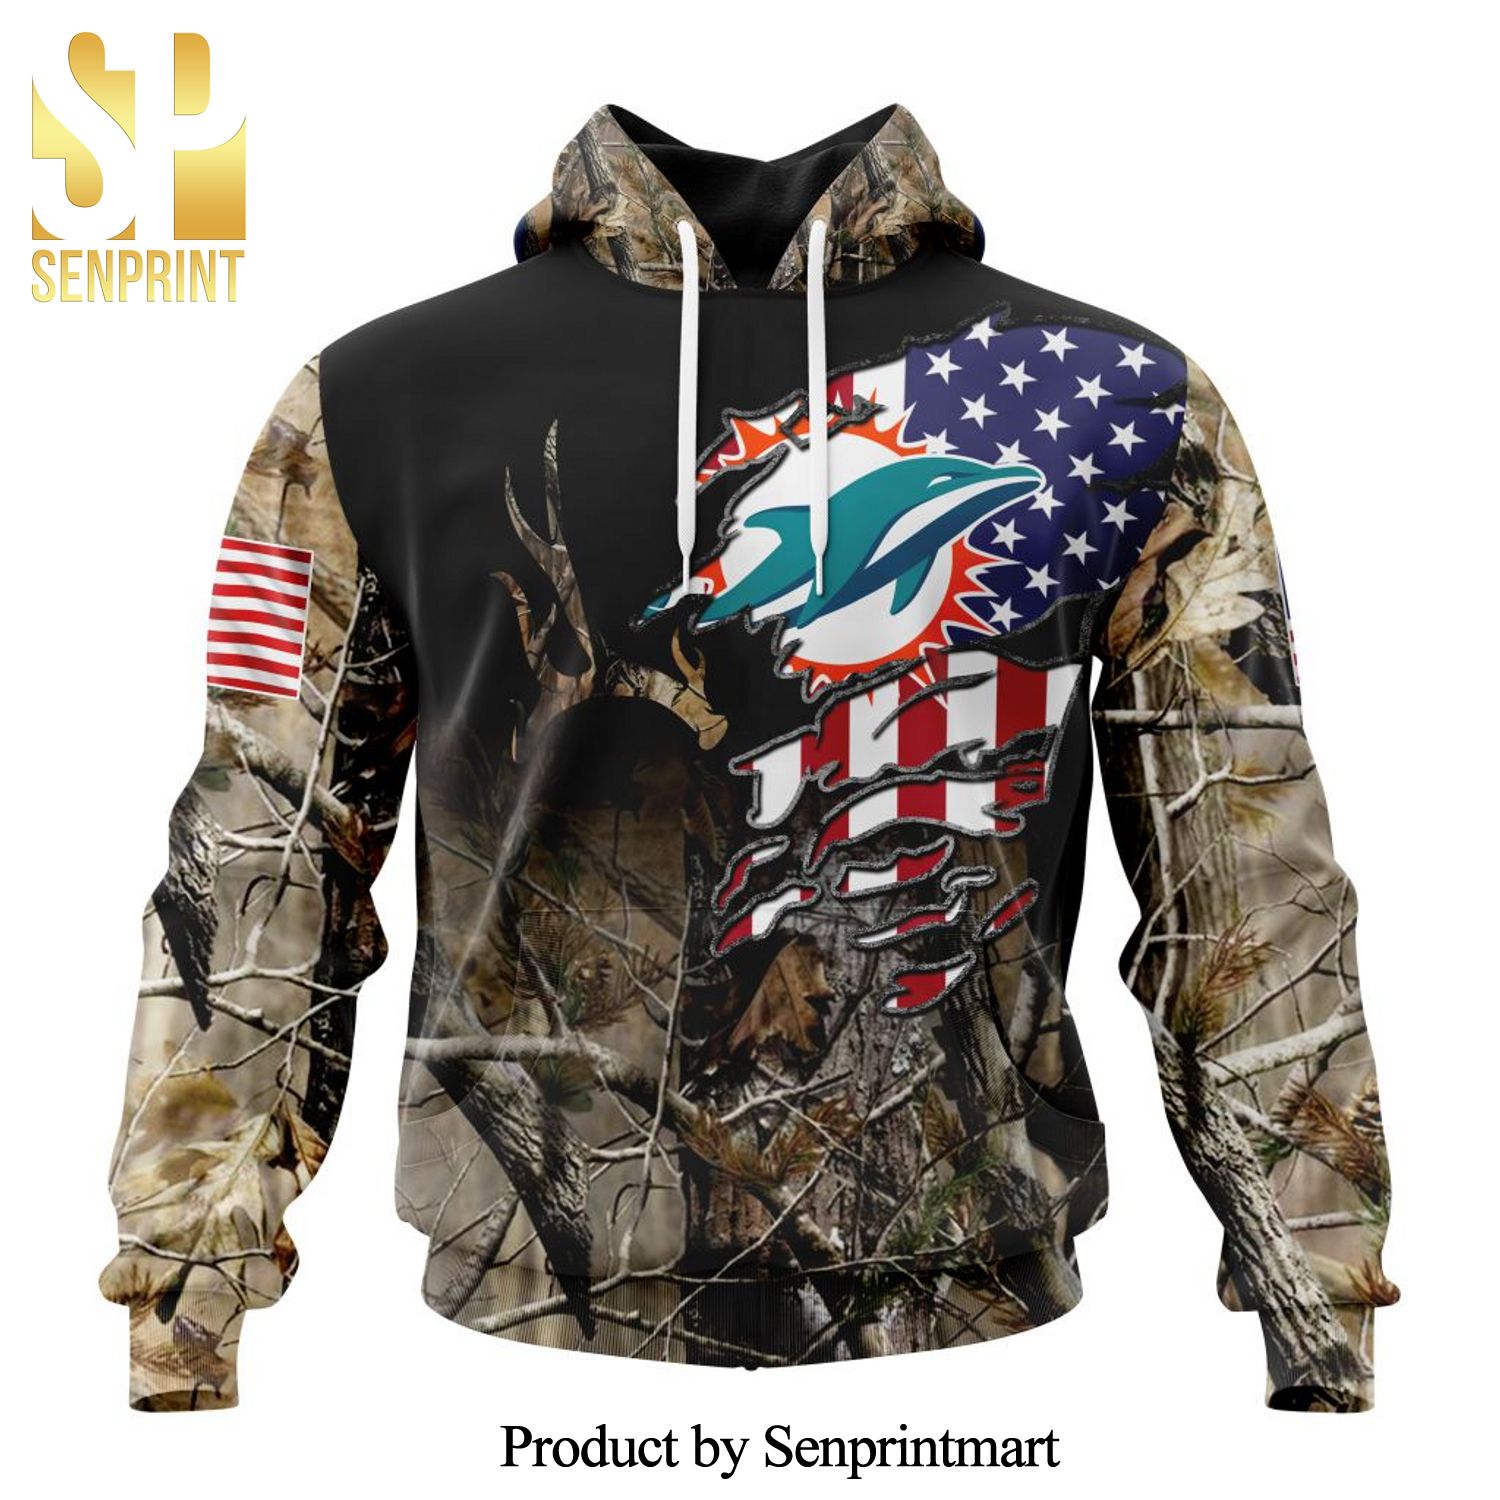 NFL Miami Dolphins Version Camo Realtree Hunting All Over Printed Shirt